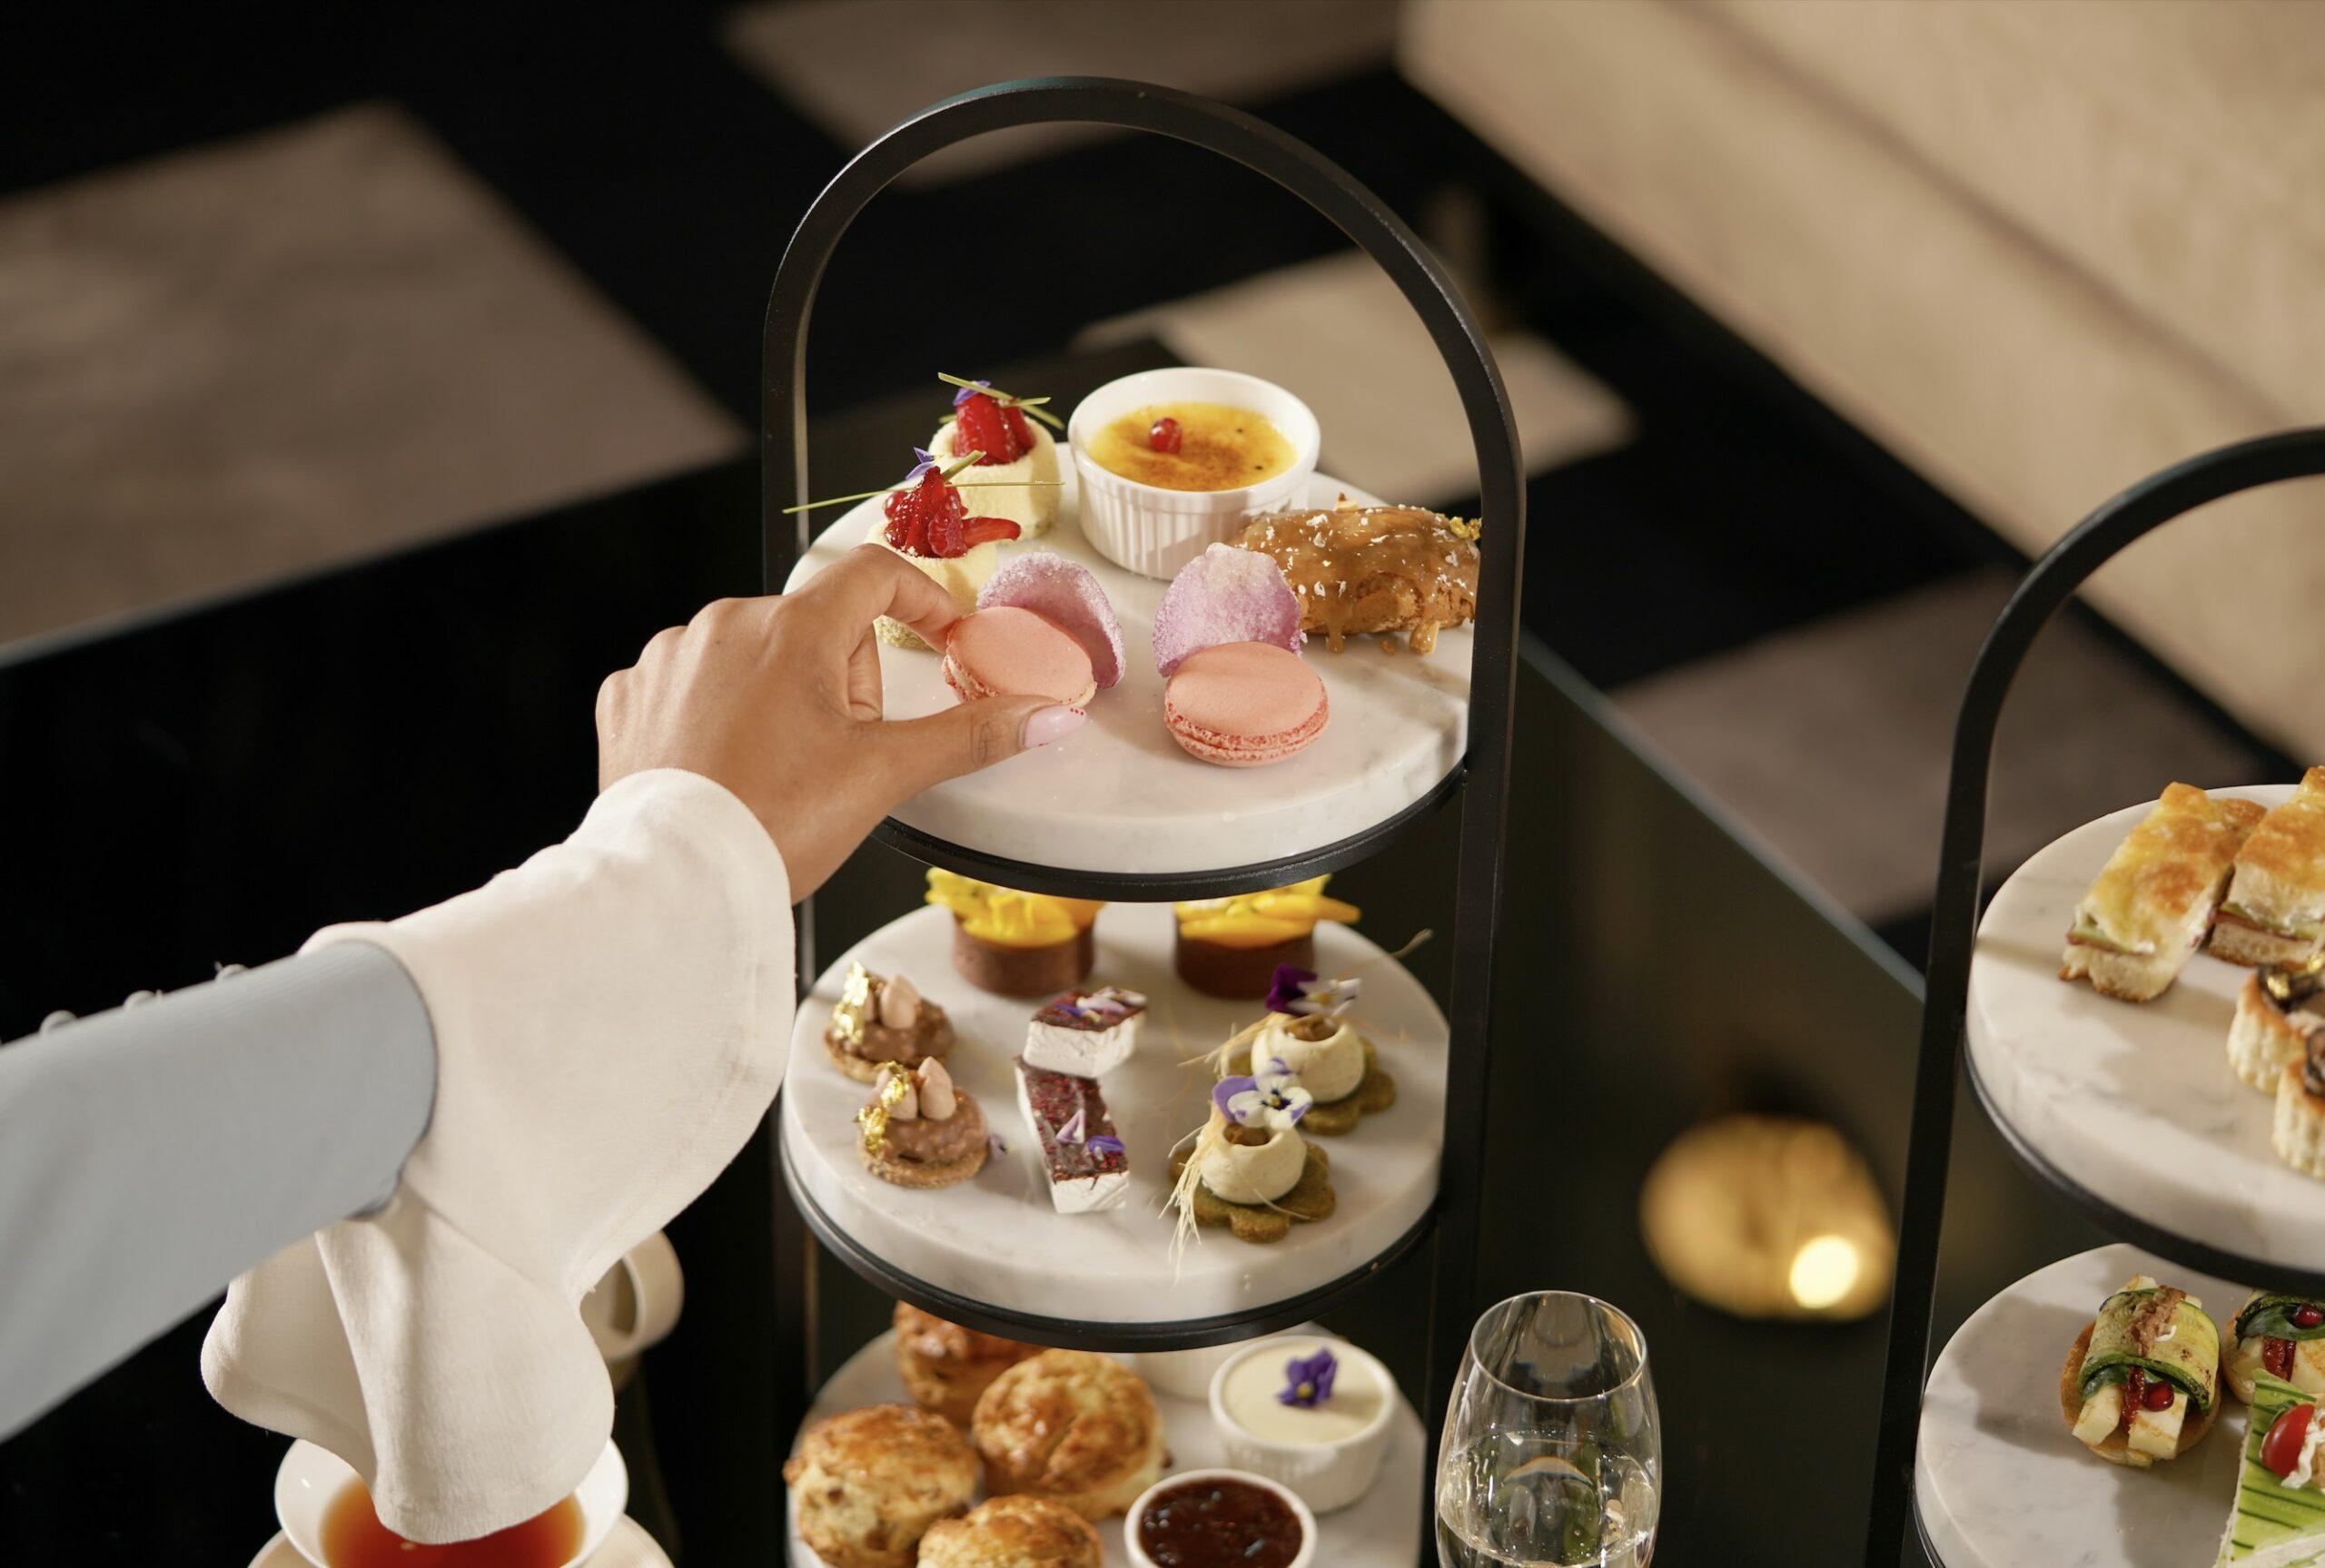 Fairmont Riyadh has launched a luxurious afternoon tea with Jo Malone London